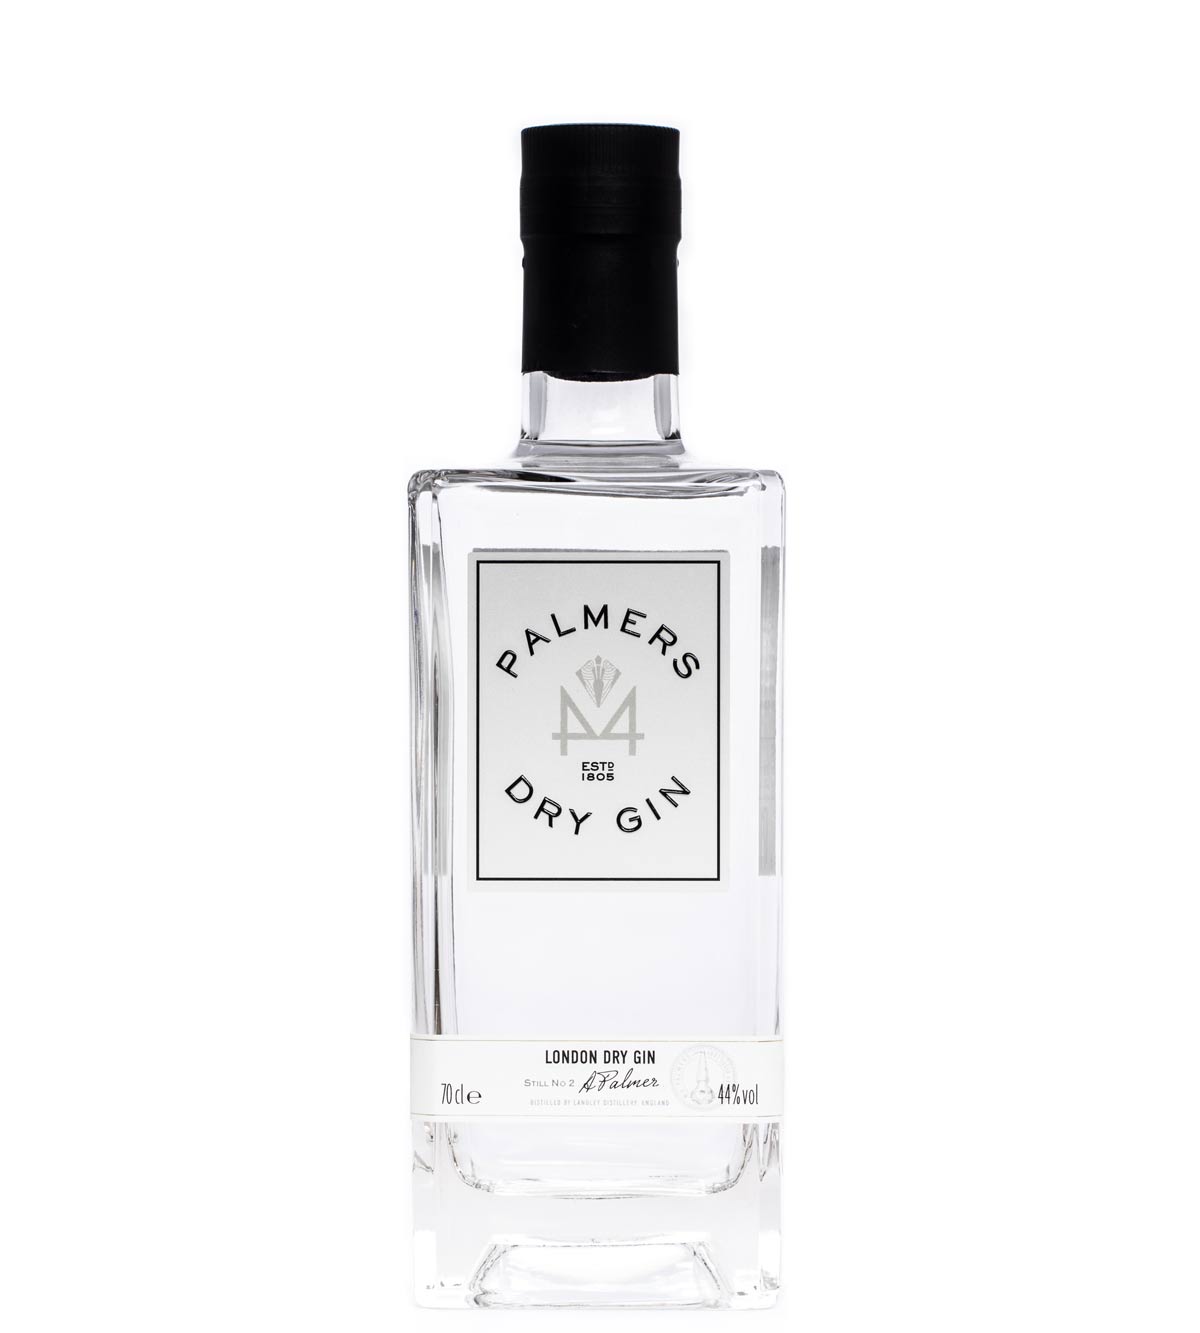 Palmers Gin - 70cl bottle available to buy online